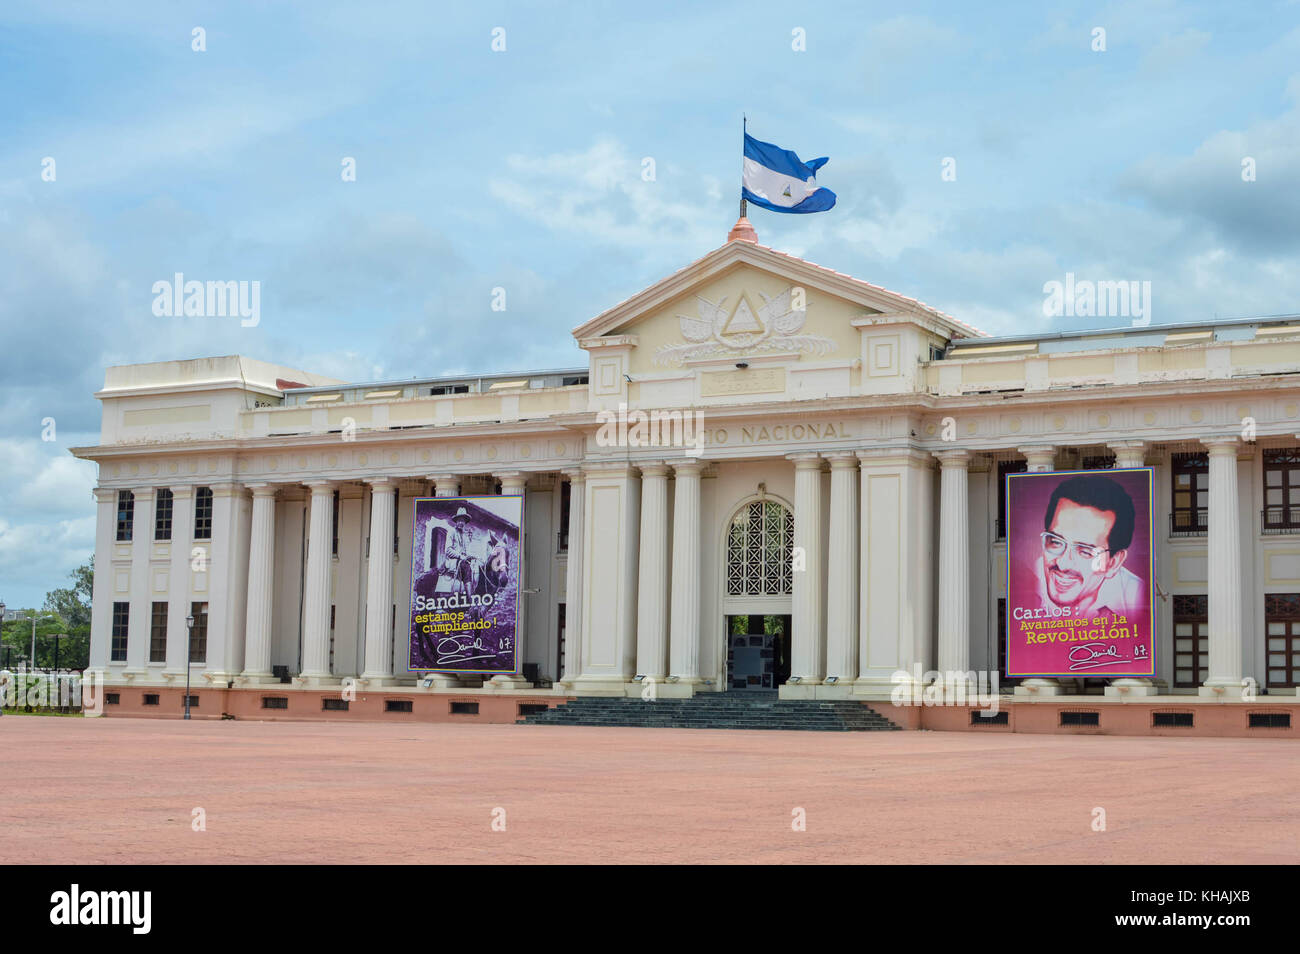 Managua, Nicaragua - August 11, 2015: National Palace building in Managua, Nicaragua. Central America Stock Photo